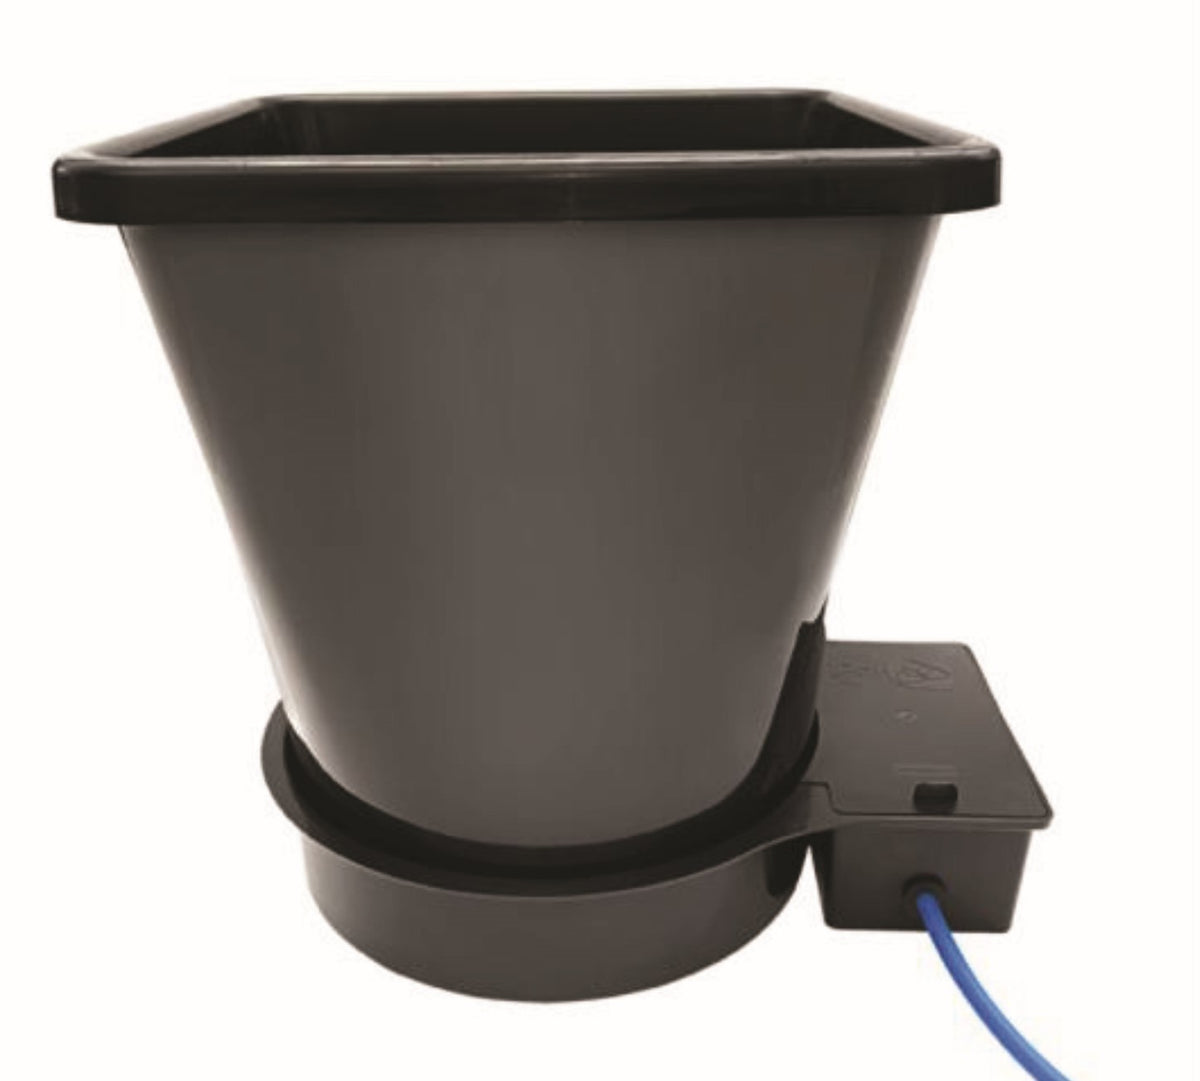 The &quot;TAS AutoPot Bucket 1XL Module, 6.6 Gallon&quot; is a black pot specifically designed for root and vining crops. It features a convenient blue hose attached to it, allowing for easy irrigation.